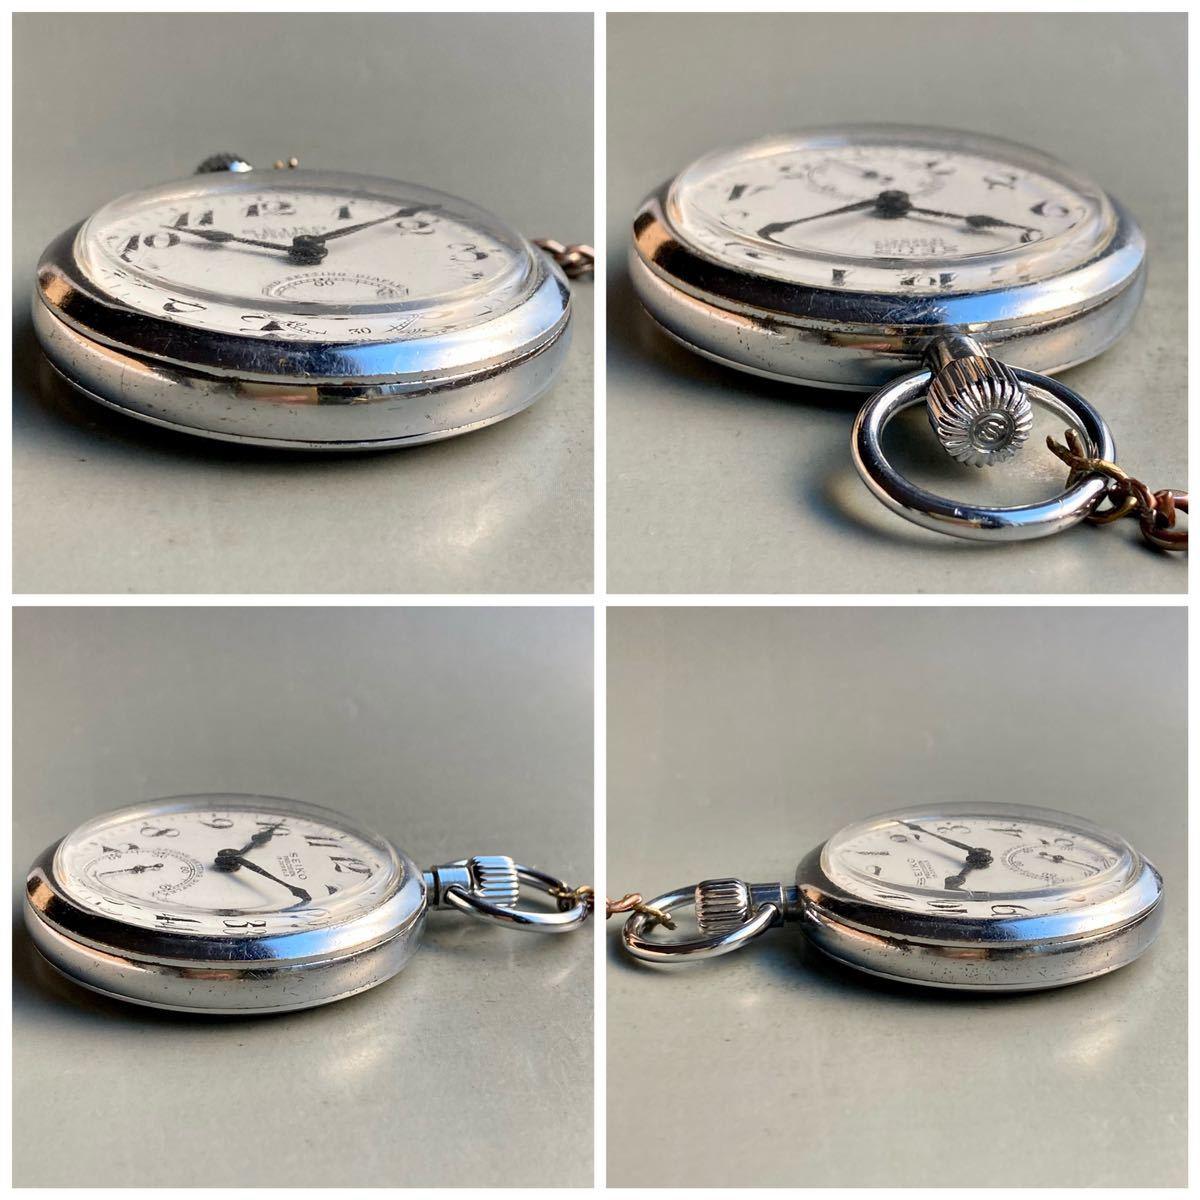 Seiko Pocket Watch Antique Railway Manual with Chain Silver 49mm Vintage - Murphy Johnson Watches Co.